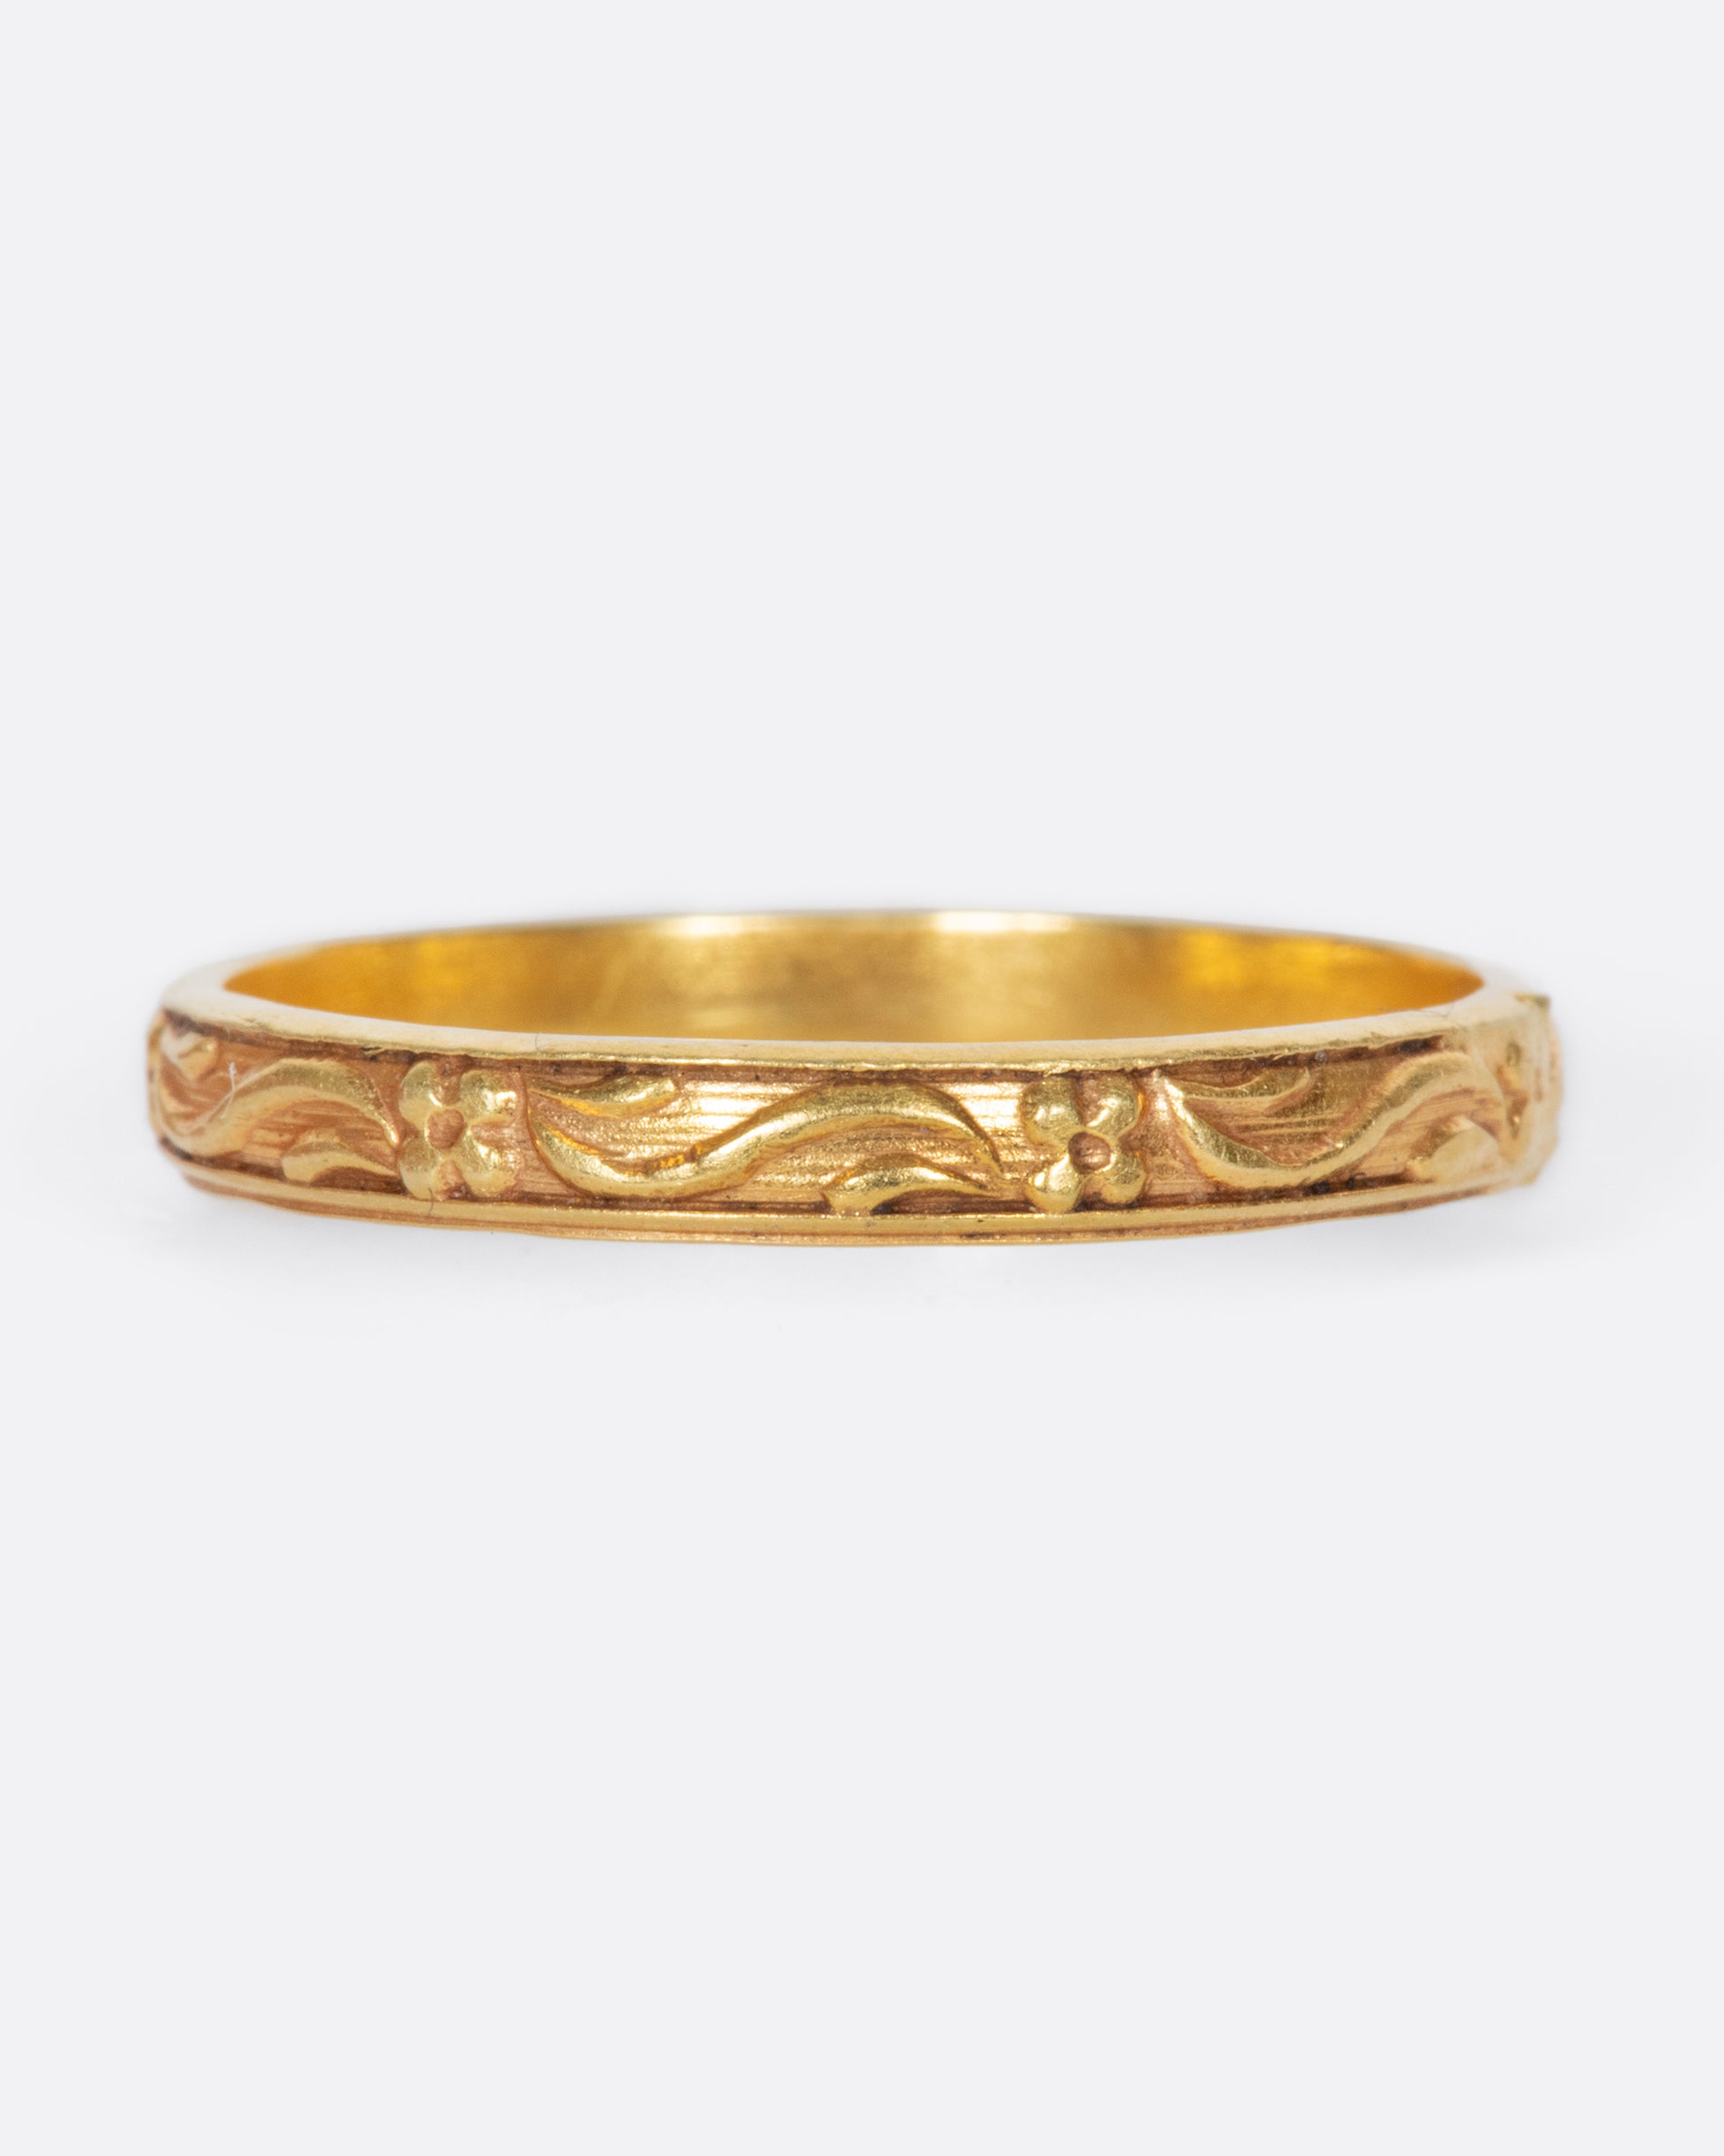 A vintage yellow gold narrow band ring with flowers and leaves throughout.